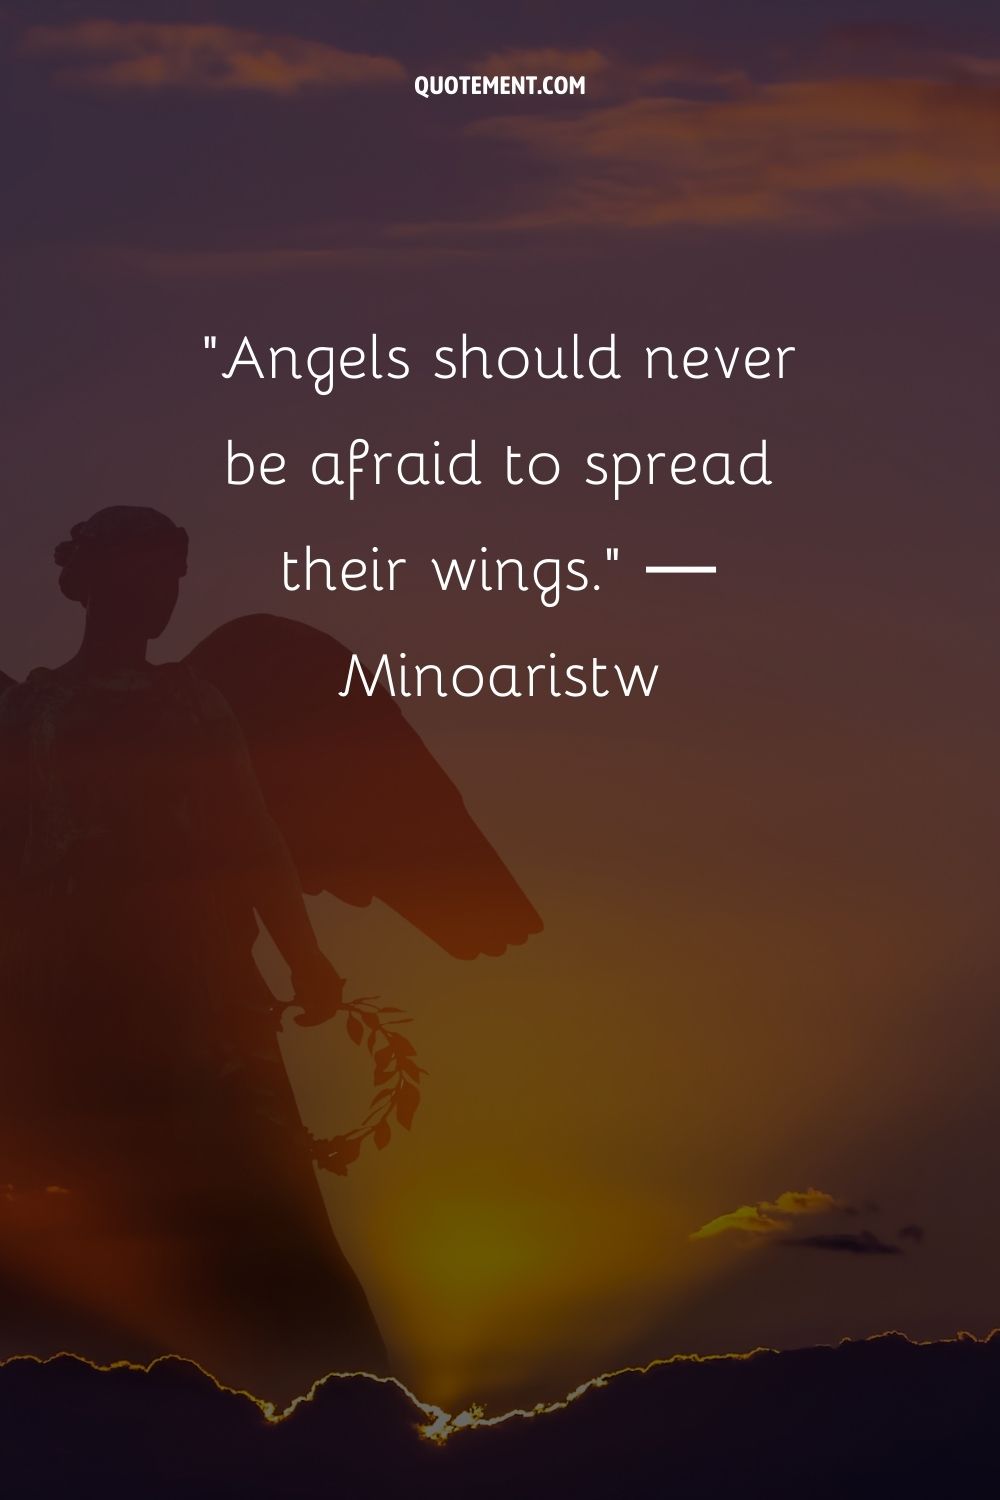 Angels should never be afraid to spread their wings.